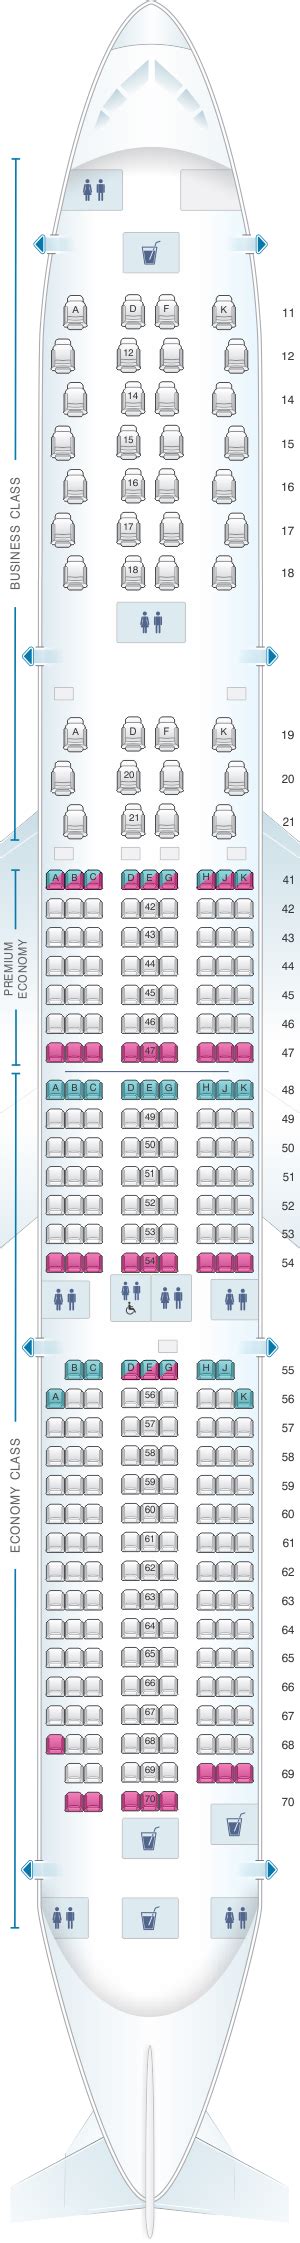 Malaysia Airlines A350 Seat Plan Plan De Cabine Malaysia Airlines